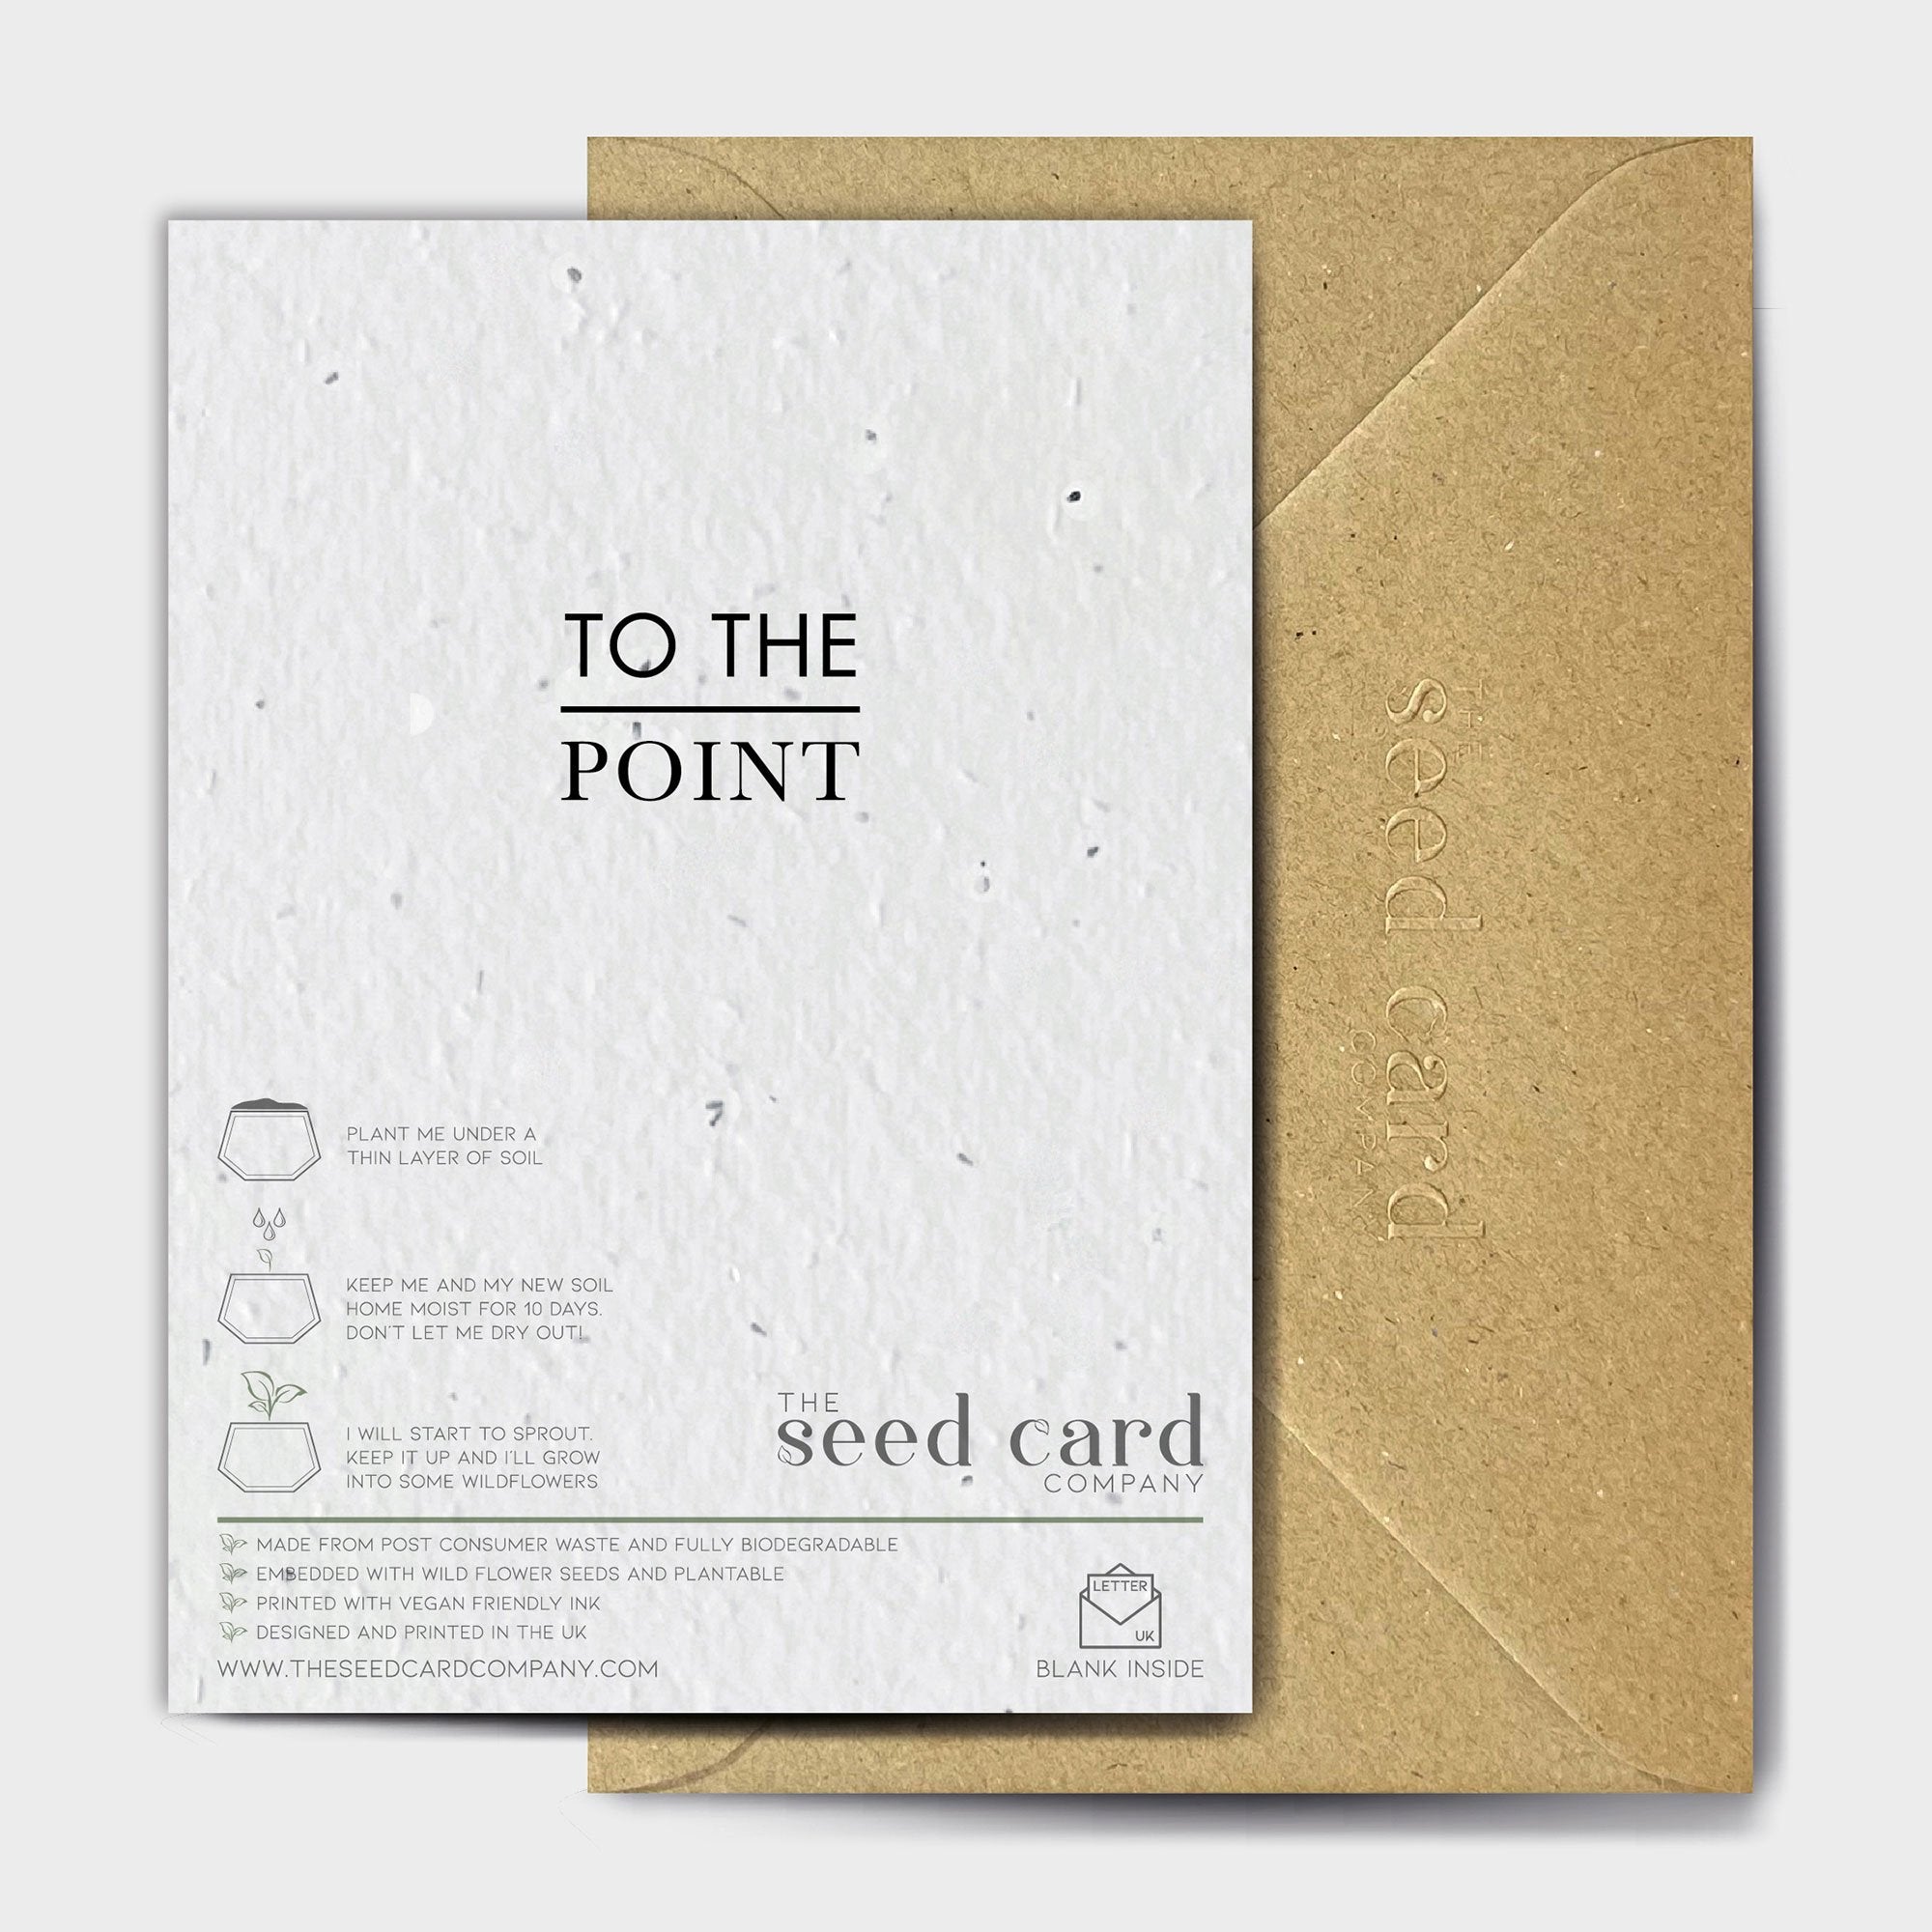 Shop online Your Greatest Achievement - 100% biodegradable seed-embedded cards Shop -The Seed Card Company